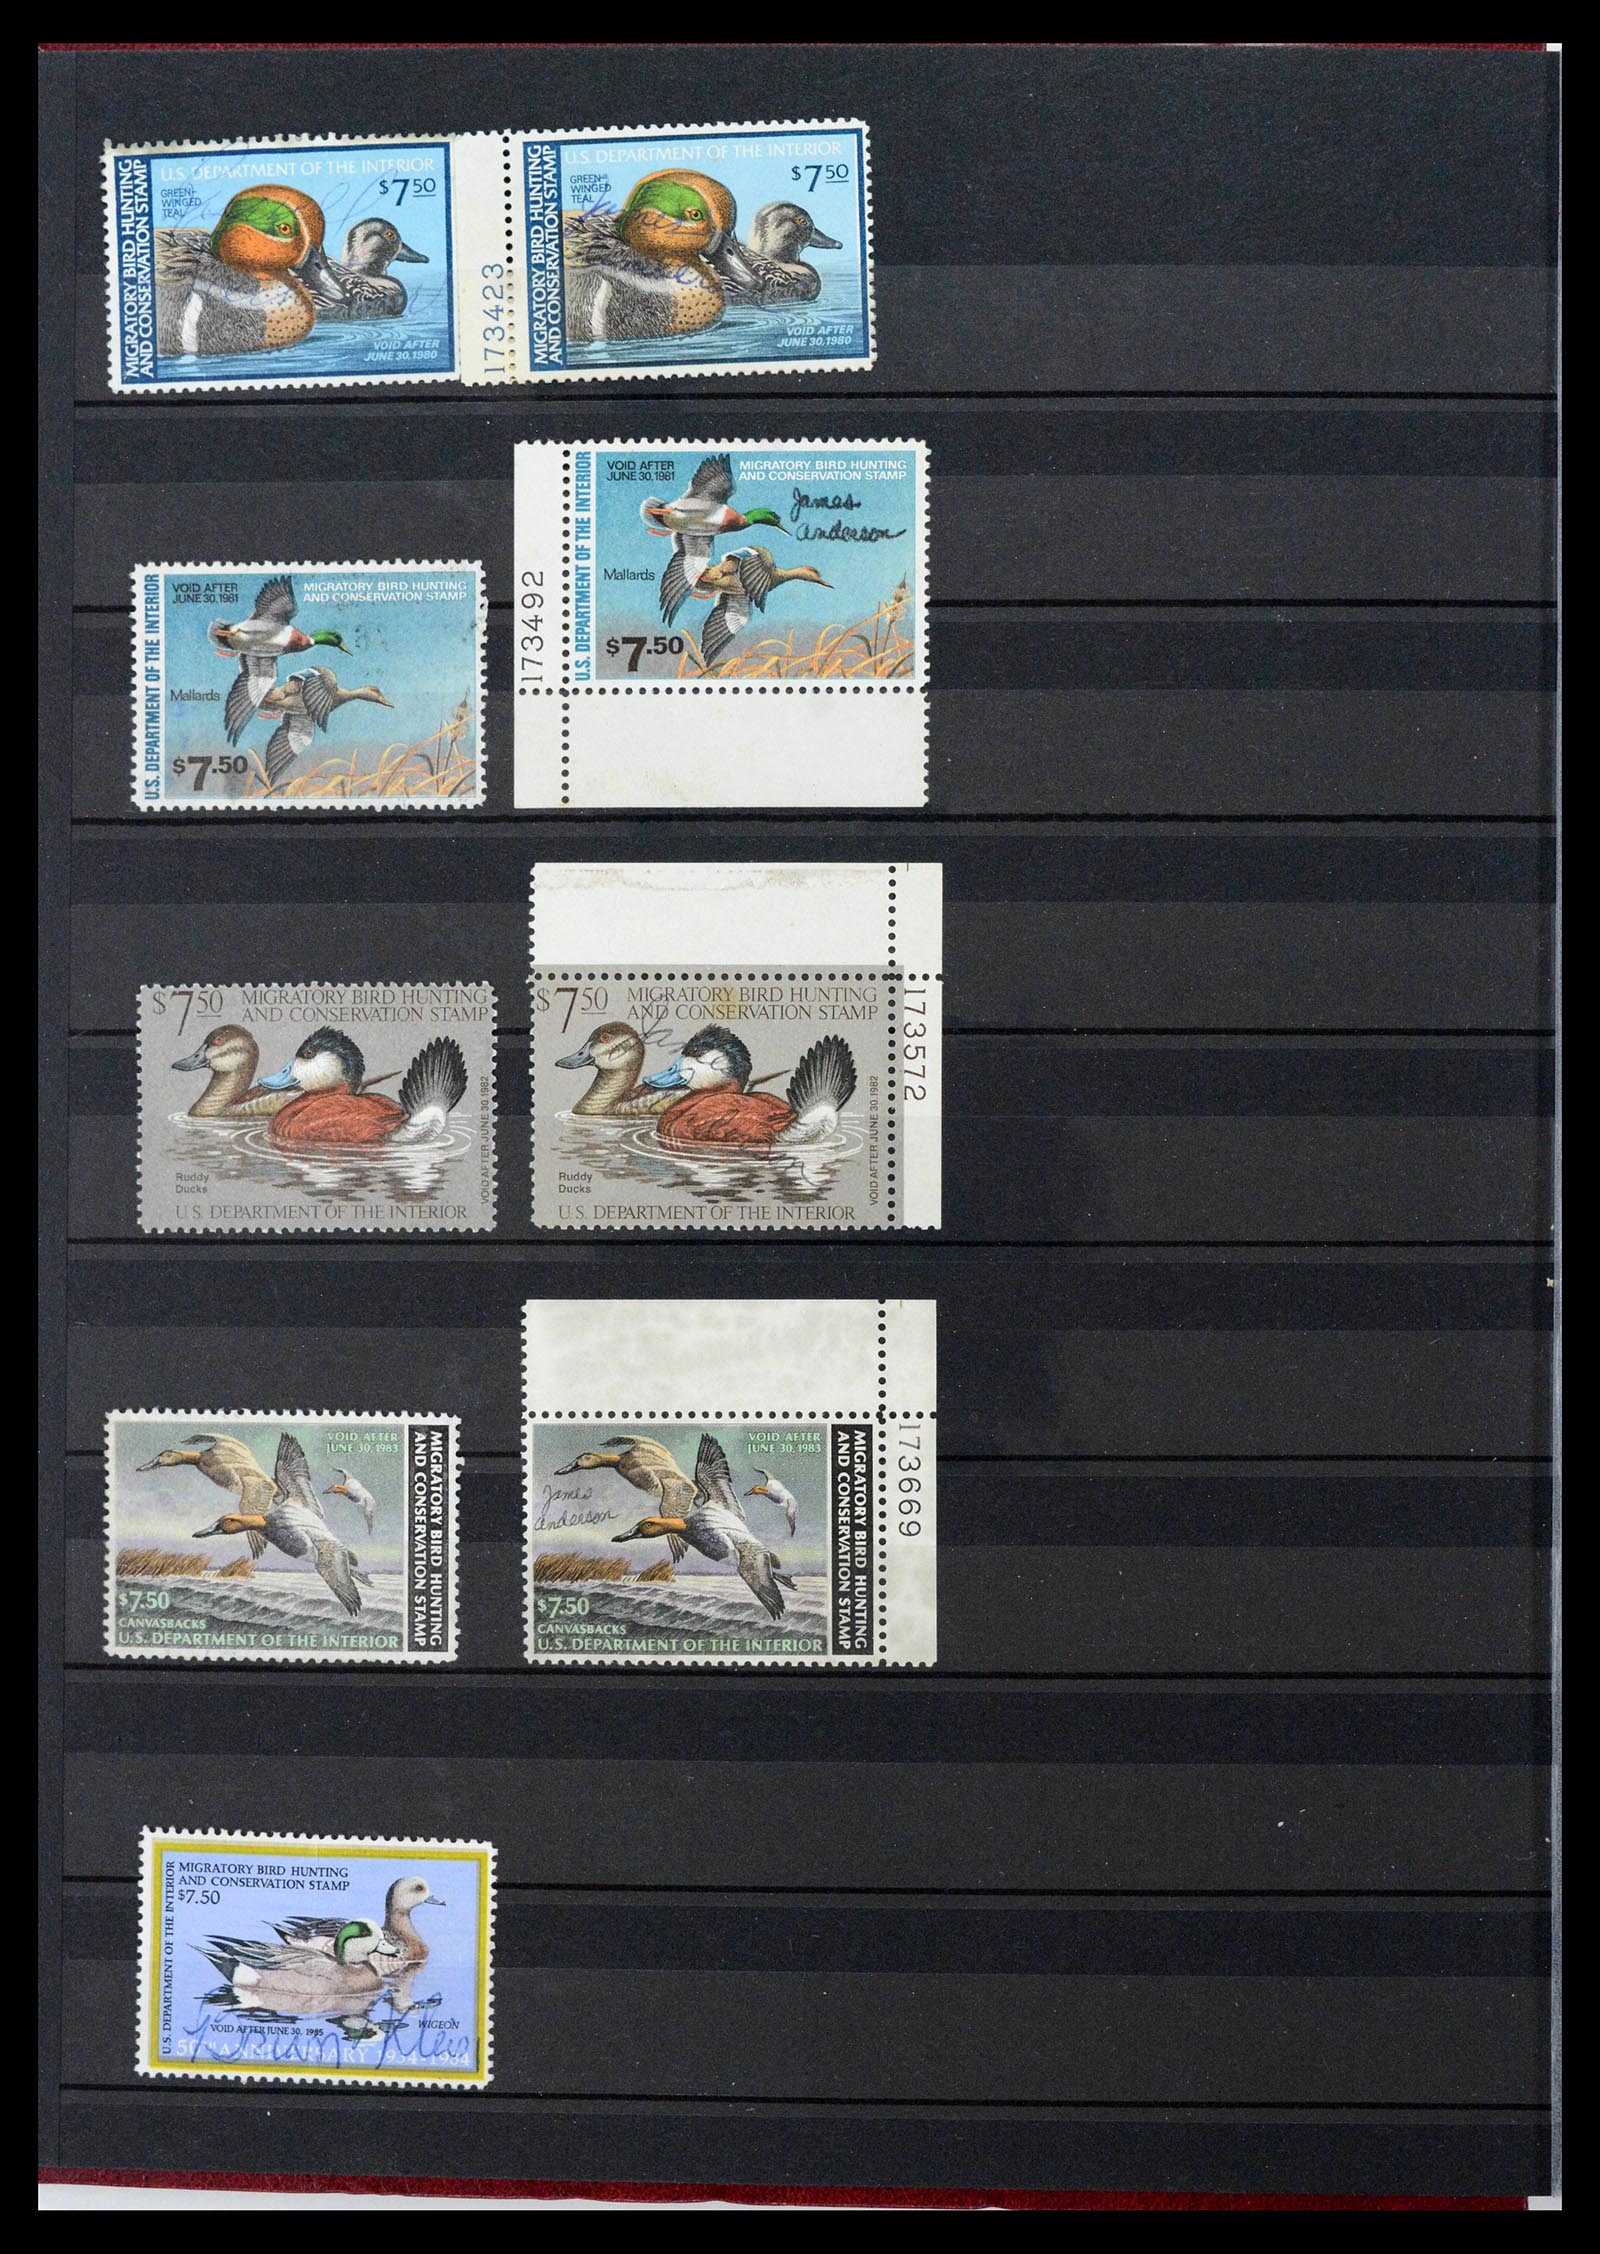 39426 0010 - Stamp collection 39426 USA duckstamps 1934-2007.